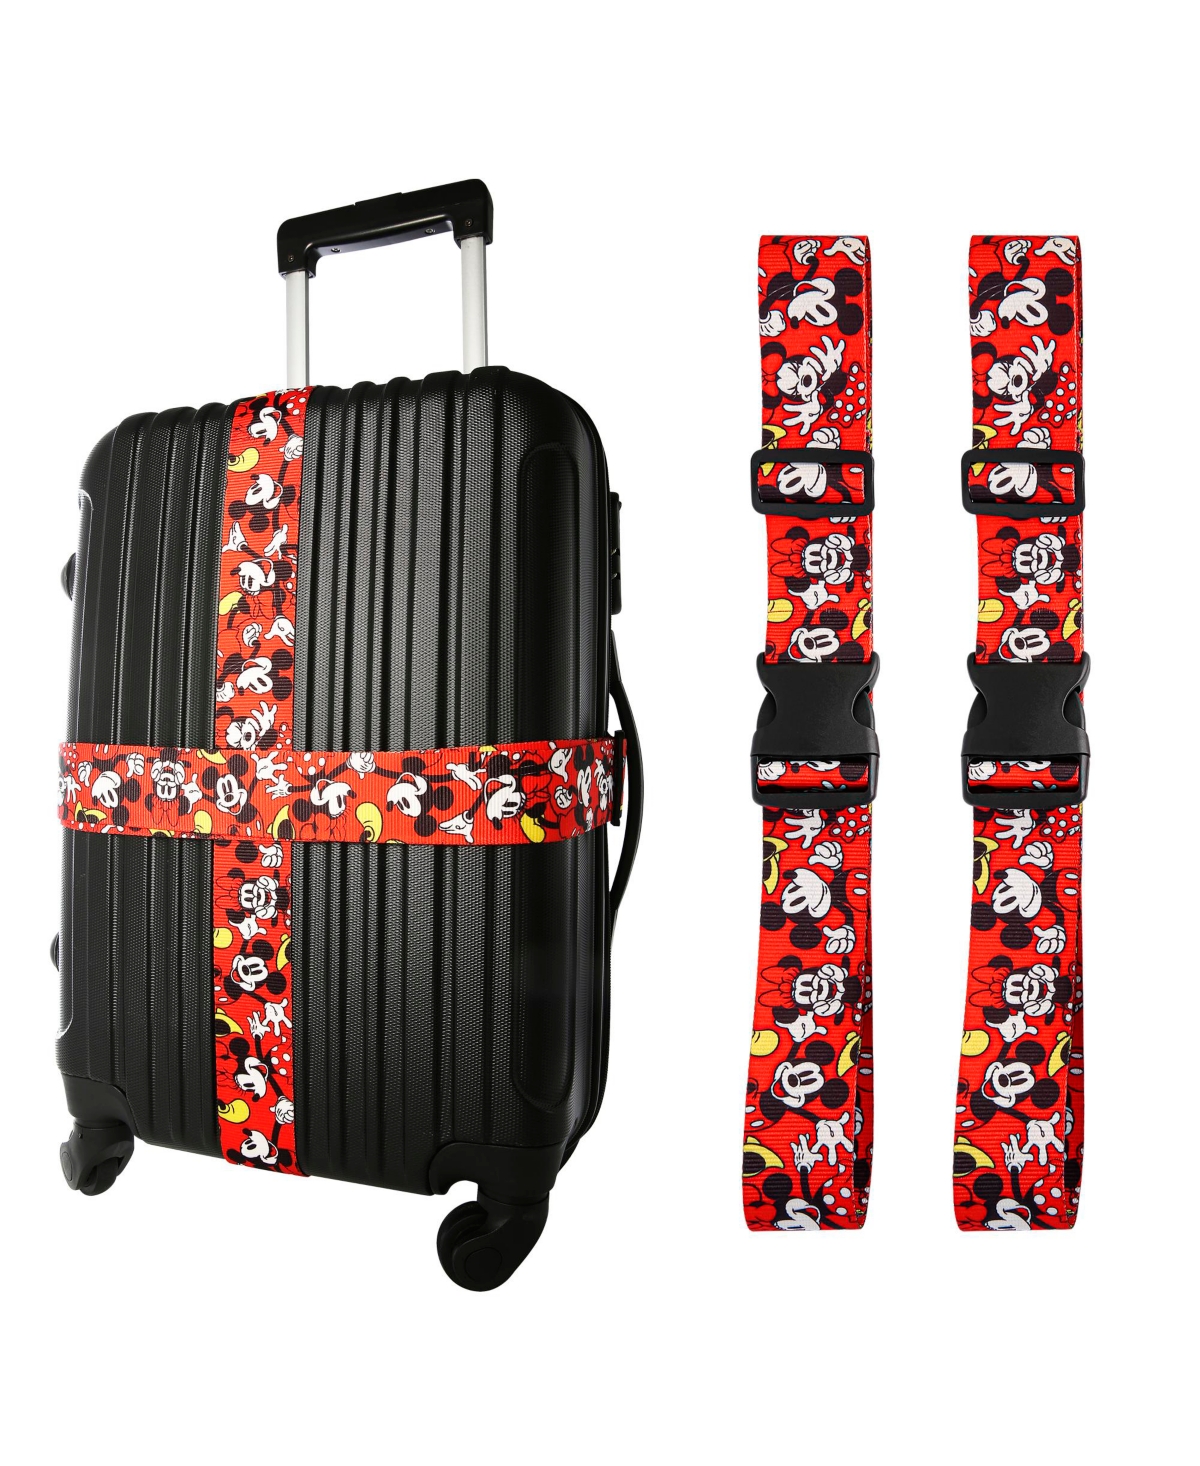 Mickey and Minnie Mouse Luggage Strap 2-Piece Set Officially Licensed, Adjustable Luggage Straps from 30'' to 72'' - Orange, yellow